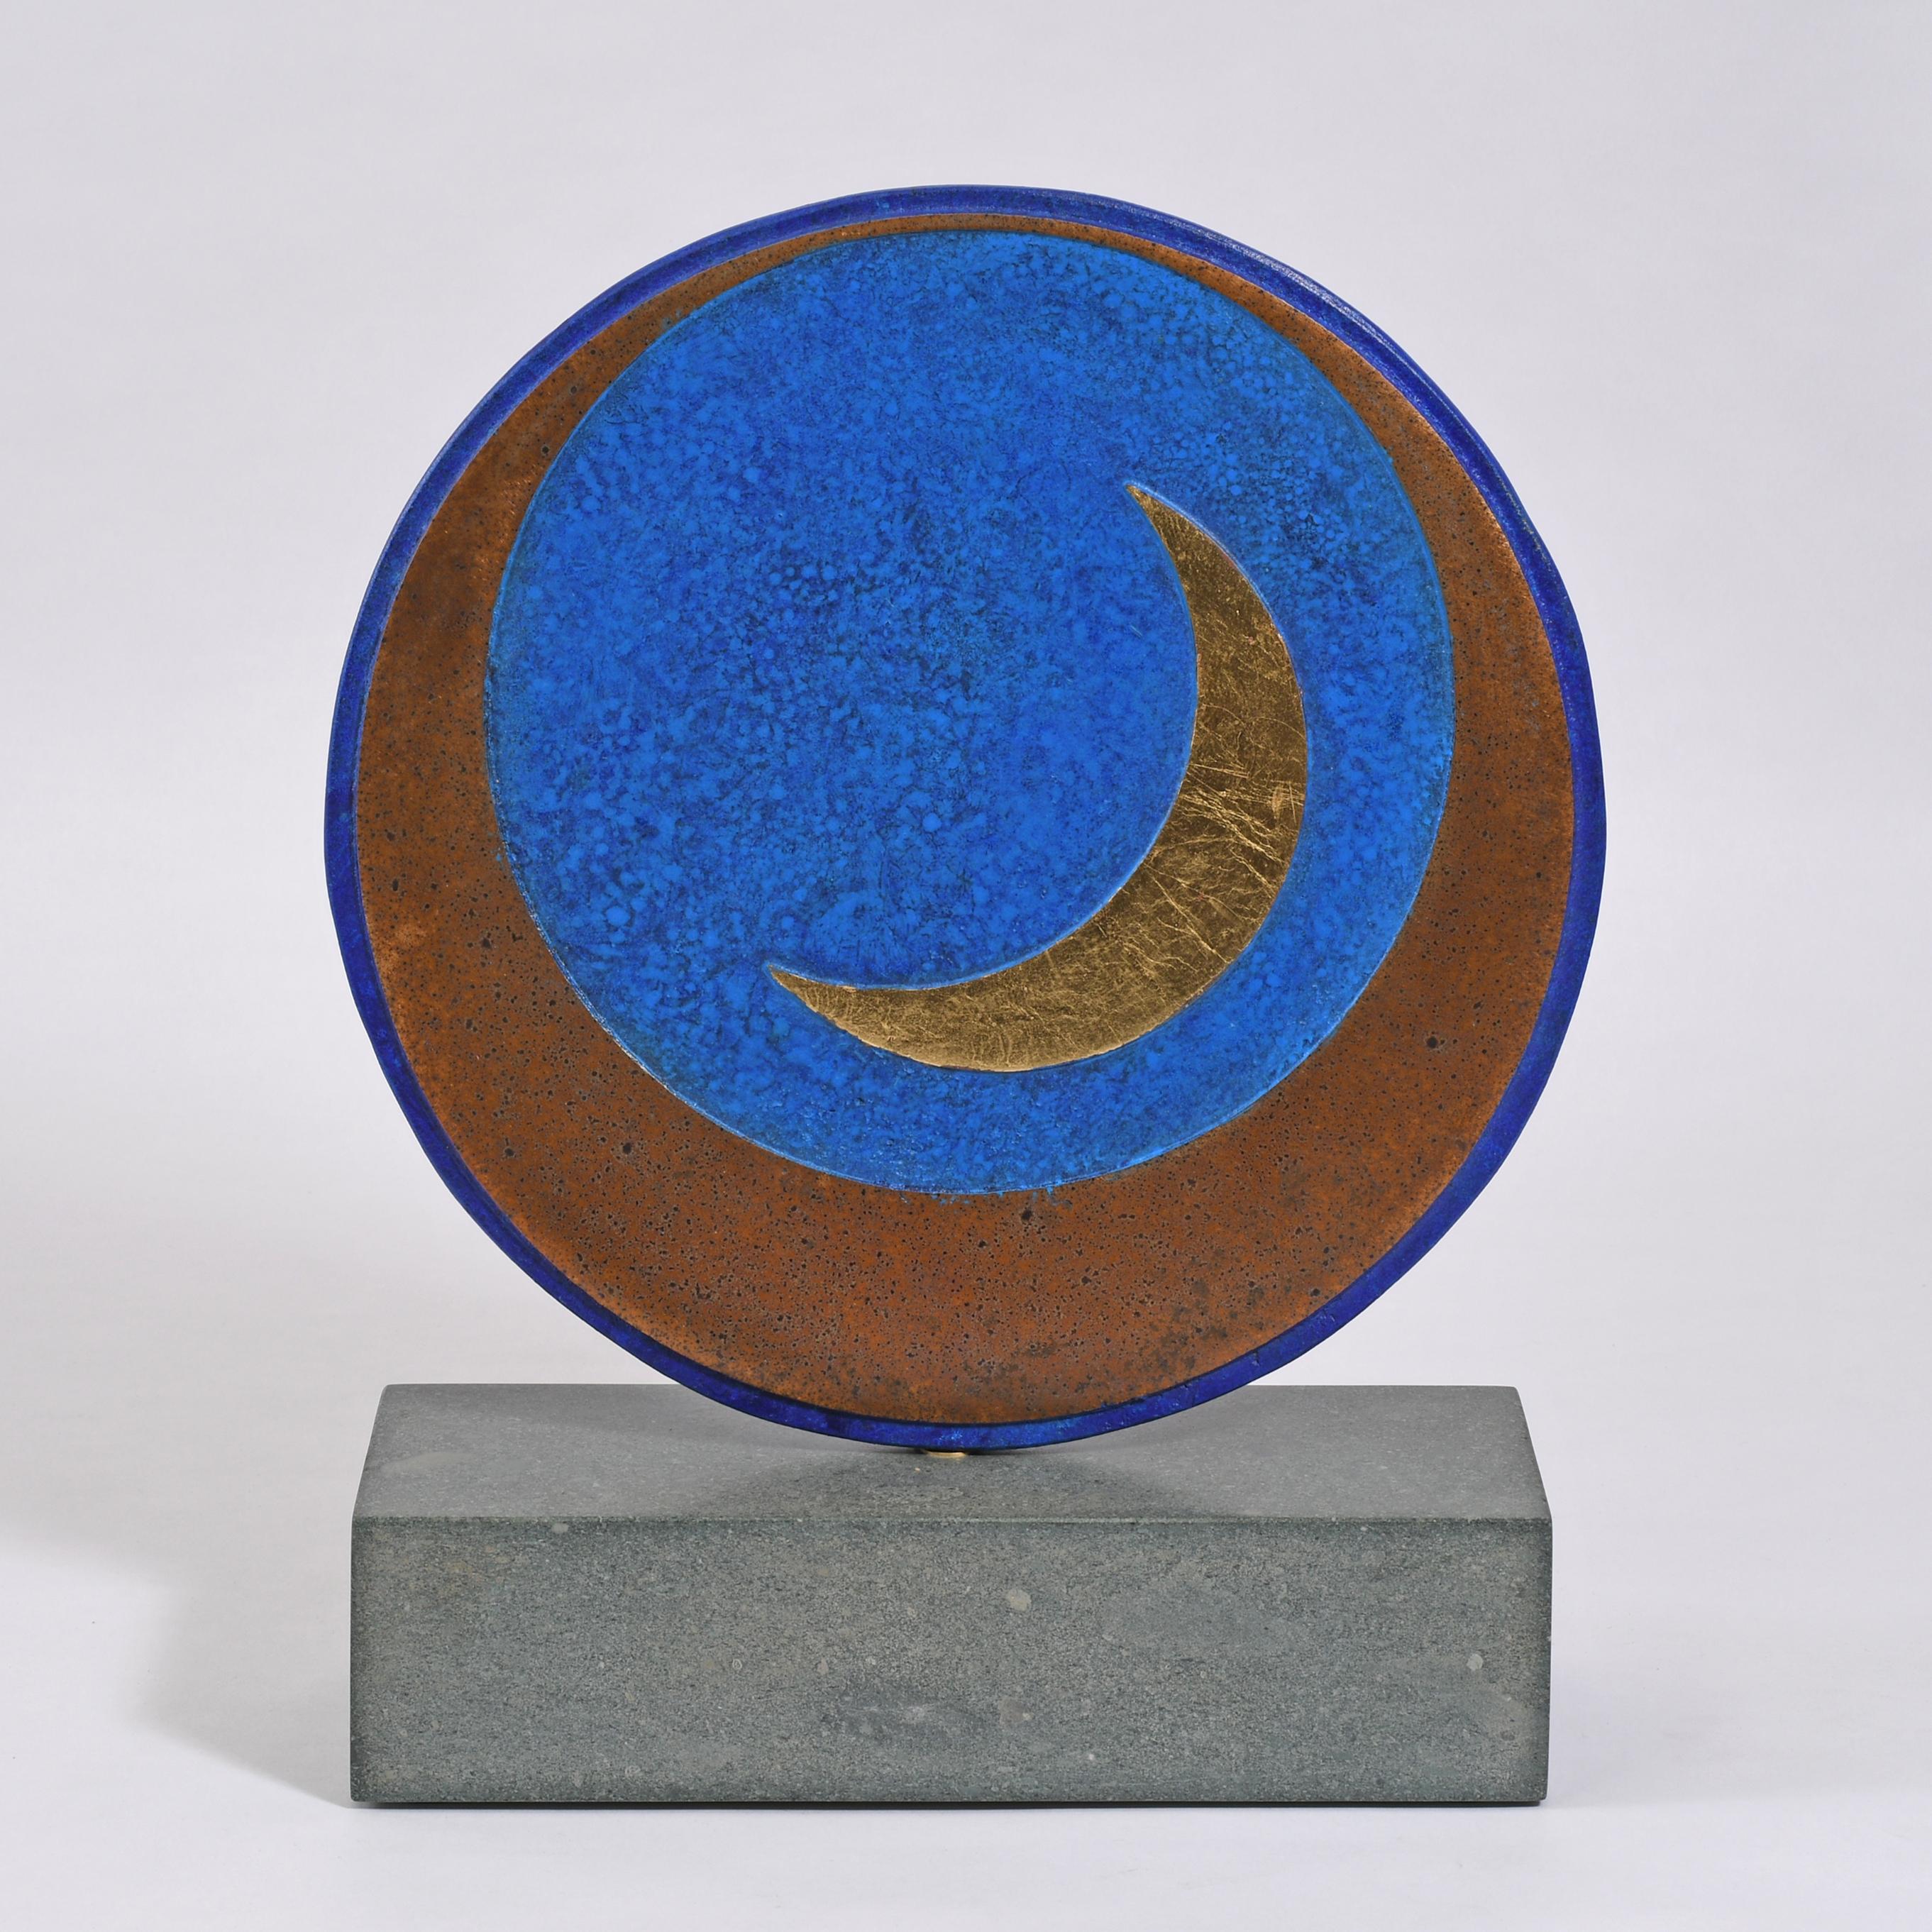 British Contemporary Sculpture by Philip Hearsey - Phases